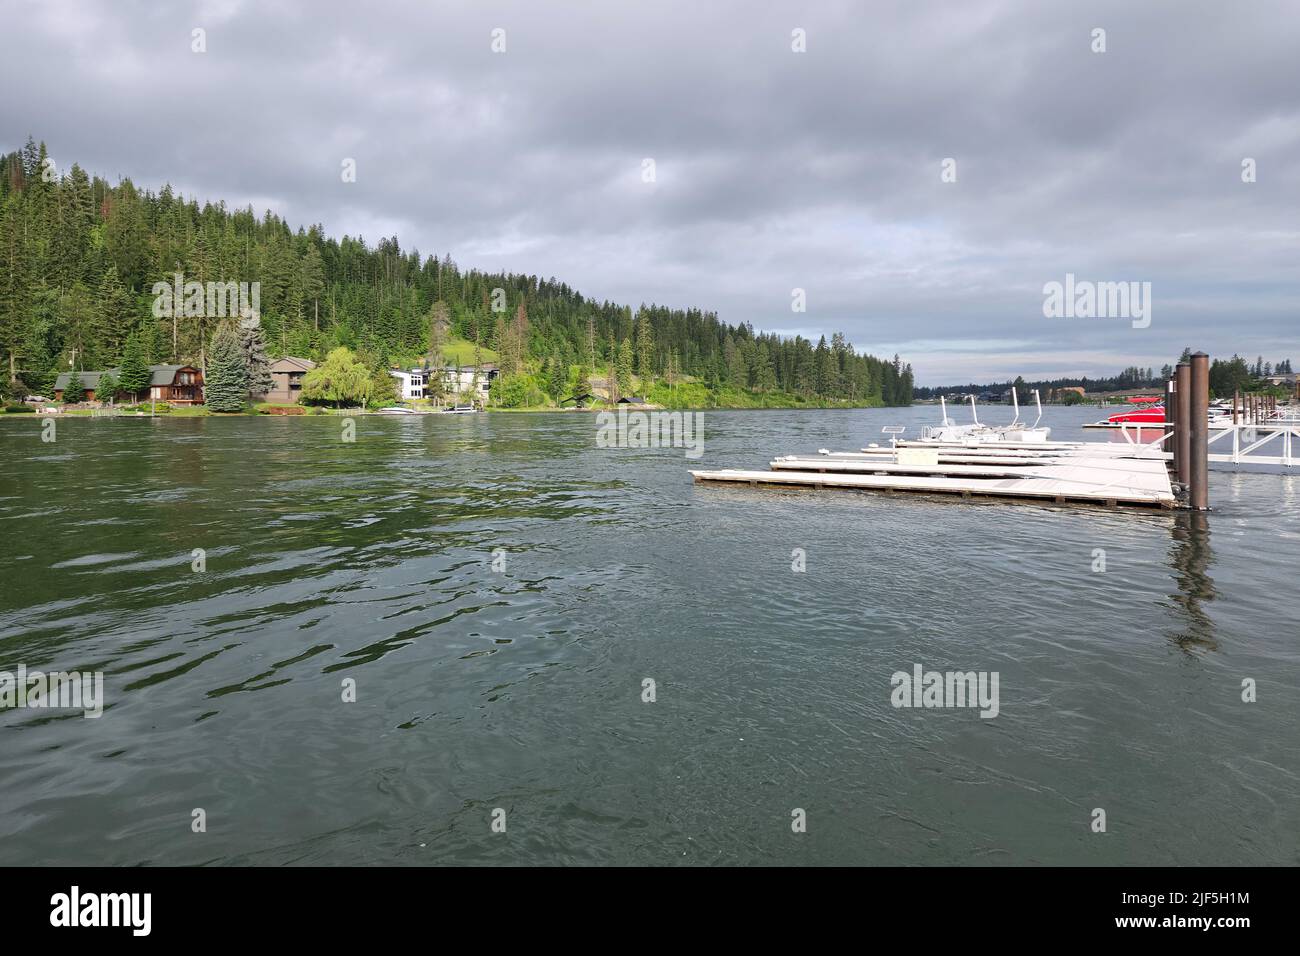 Coeur d'Alene, Idaho - June 18, 20922 - Spokane River and surrounding residential areas in city center. Stock Photo